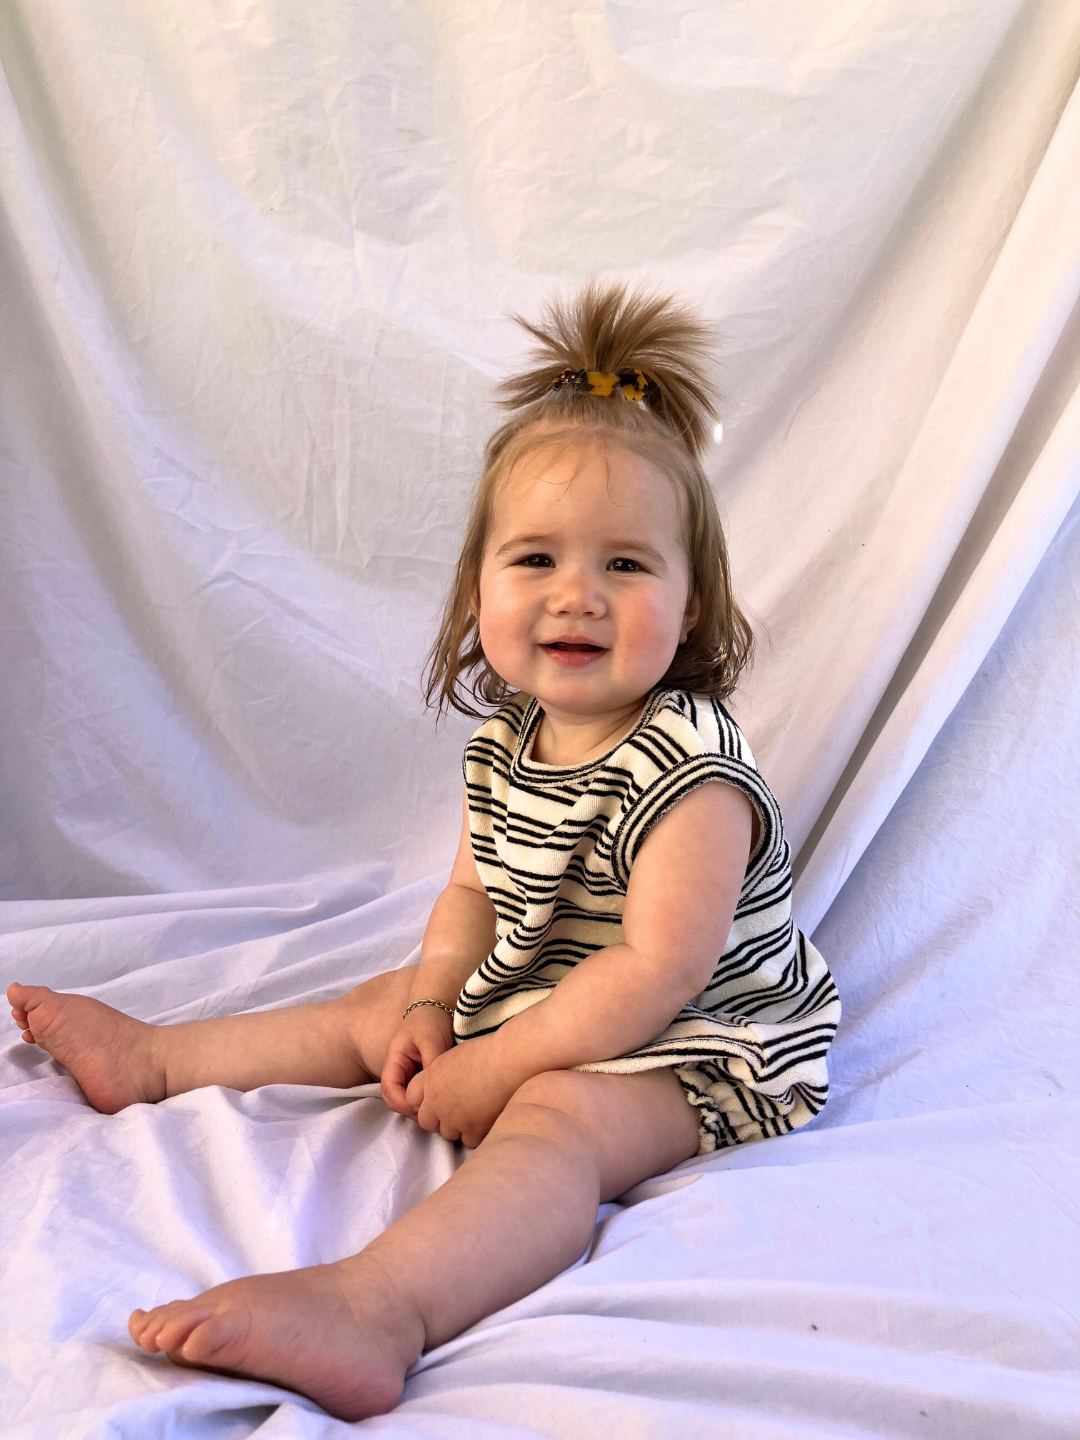 A toddler wearing the Terry Bubble Bodysuit in cream terrycloth printed with black stripes. She wears a high ponytail and a gold bracelet, and is seated on a beige cloth backdrop.